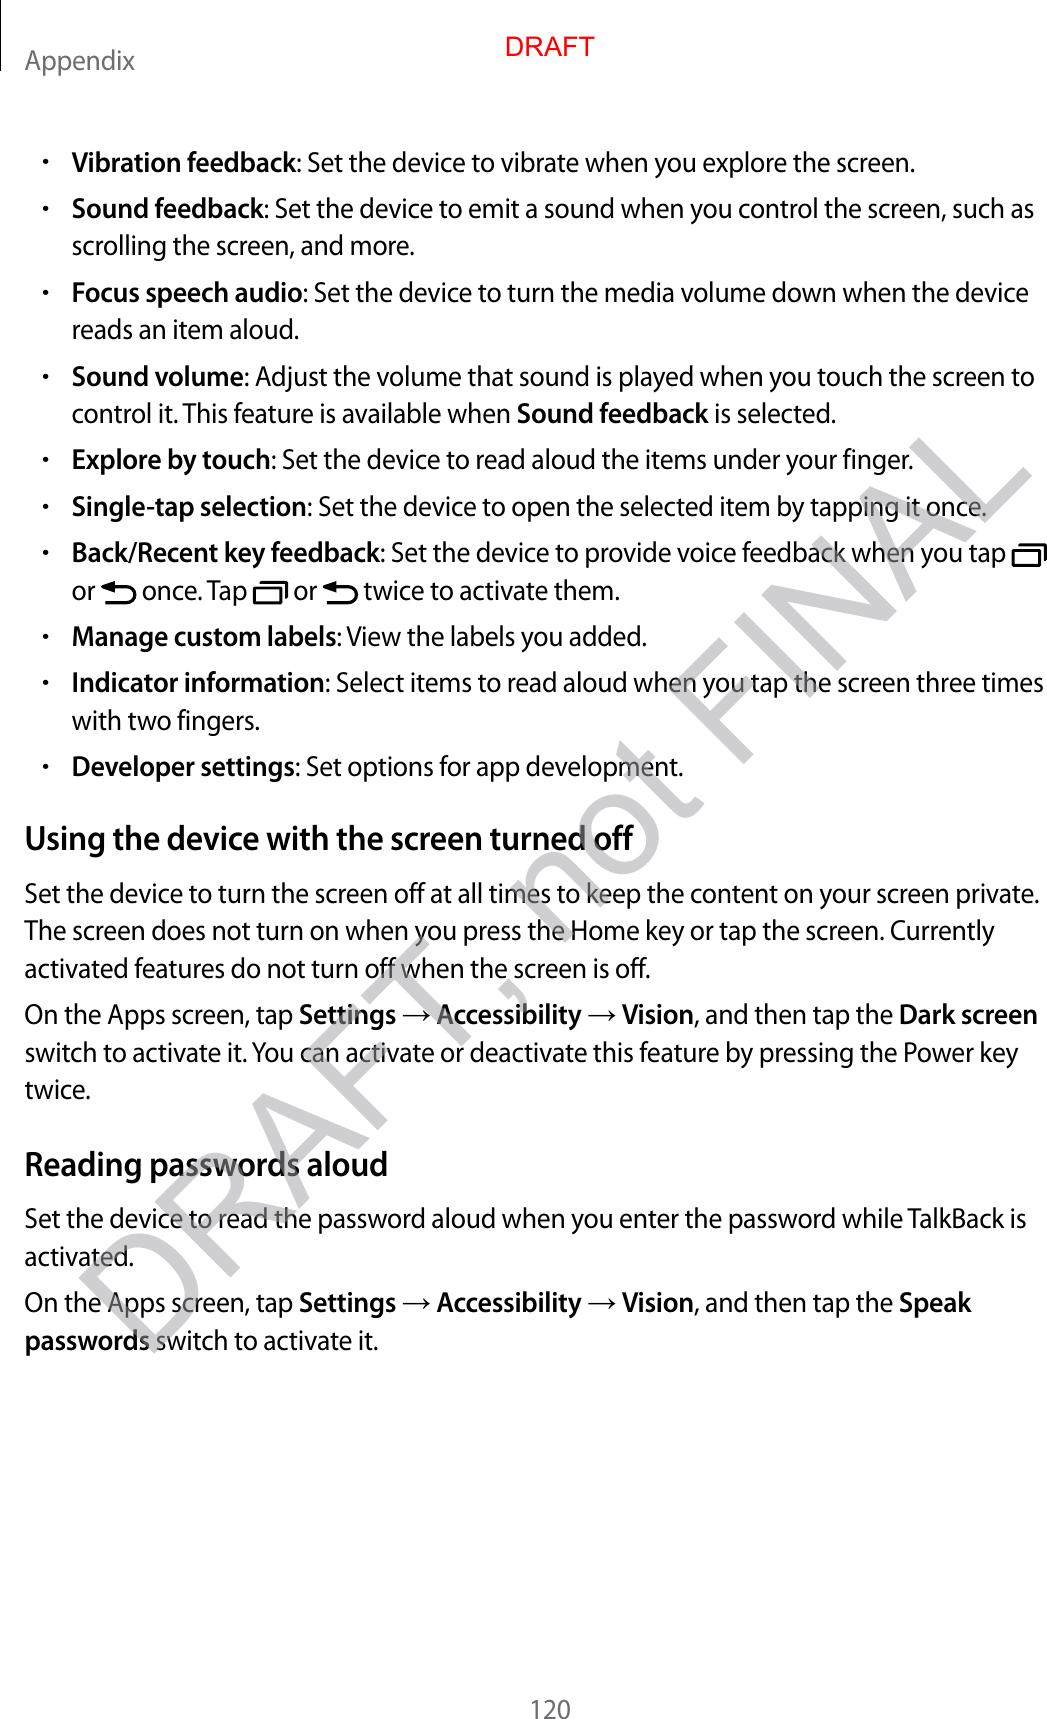 Appendix120•V ibr ation feedback: Set the device to vibrat e when y ou explor e the scr een.•Sound feedback: Set the device to emit a sound when you c ontr ol the scr een, such as scrolling the scr een, and mor e .•Focus speech audio: Set the device to turn the media volume do wn when the device reads an item aloud .•Sound volume: Adjust the v olume that sound is pla y ed when y ou t ouch the scr een to contr ol it. This feature is a v ailable when Sound feedback is selected.•Explore by t ouch: Set the device to read aloud the it ems under y our finger.•Single-tap selection: Set the device to open the selected item by tapping it onc e .•Back/Recent ke y f eedback: Set the device to pro vide v oic e f eedback when y ou tap   or   once. T ap   or   twice to activat e them.•Manage custom labels: View the labels y ou added .•Indicator informa tion: Select items to r ead aloud when y ou tap the scr een thr ee times with two fingers.•Developer settings: Set options for app developmen t.Using the devic e with the scr een turned offSet the device to turn the screen off at all times t o keep the c ont ent on y our scr een privat e . The screen does not turn on when y ou pr ess the Home key or tap the scr een. C urr ently activated fea tur es do not turn off when the screen is off.On the Apps screen, tap Settings  Accessibility  Vision, and then tap the Dark screen switch to activate it. You can activate or deactivate this featur e b y pr essing the Power key twice.Reading passwor ds aloudSet the device to read the passw or d aloud when y ou en ter the passw or d while TalkBack is activated.On the Apps screen, tap Settings  Accessibility  Vision, and then tap the Speak passwords switch to activate it.DRAFTDRAFT, not FINAL